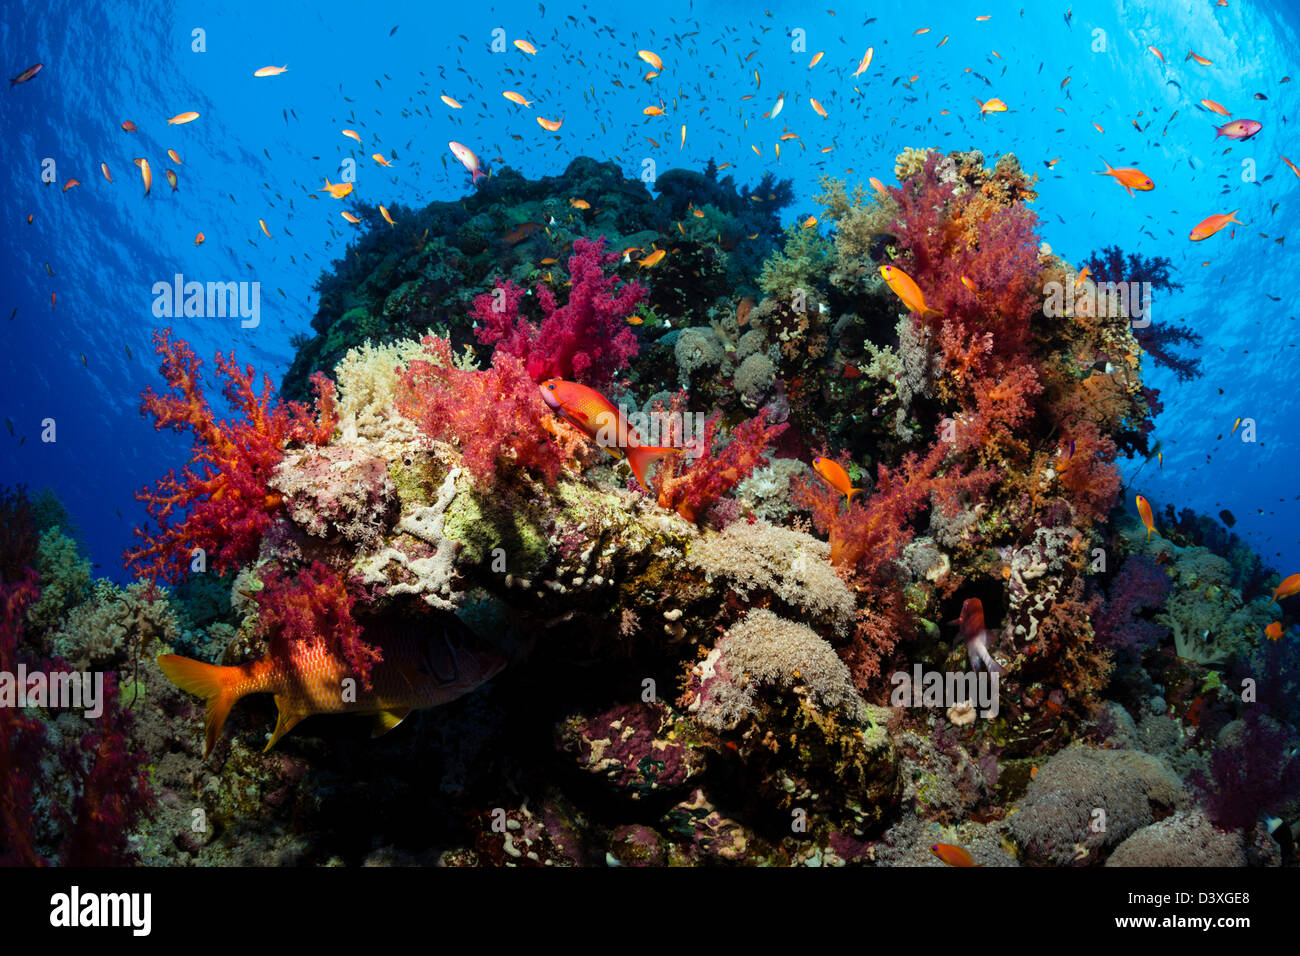 Soft Coral Reef, Dendronephthya sp., Elphinstone Reef, Mar Rosso, Egitto Foto Stock